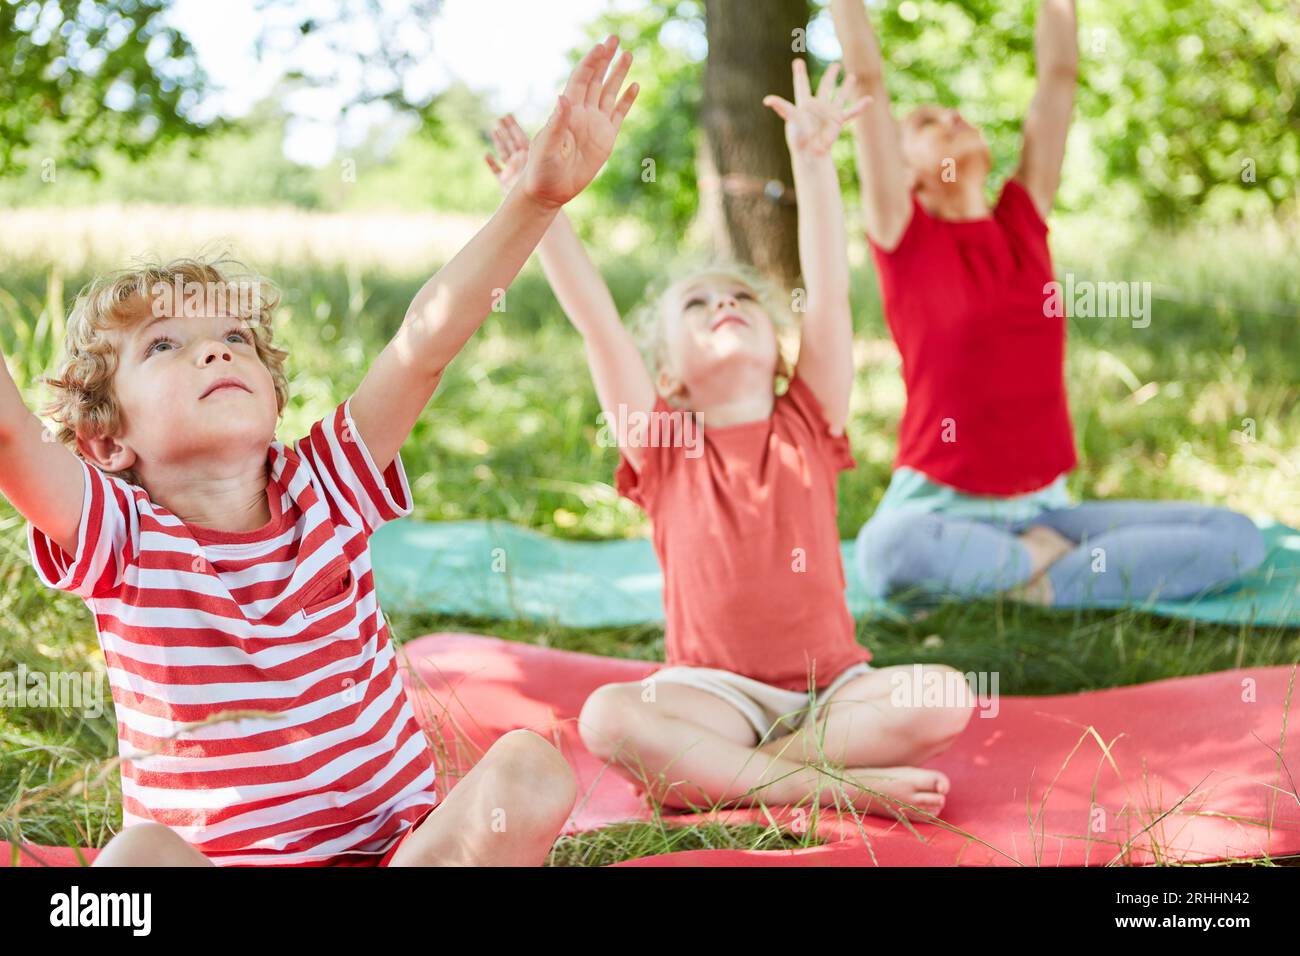 Family sitting on mat with arms raised while doing exercise in park Stock Photo